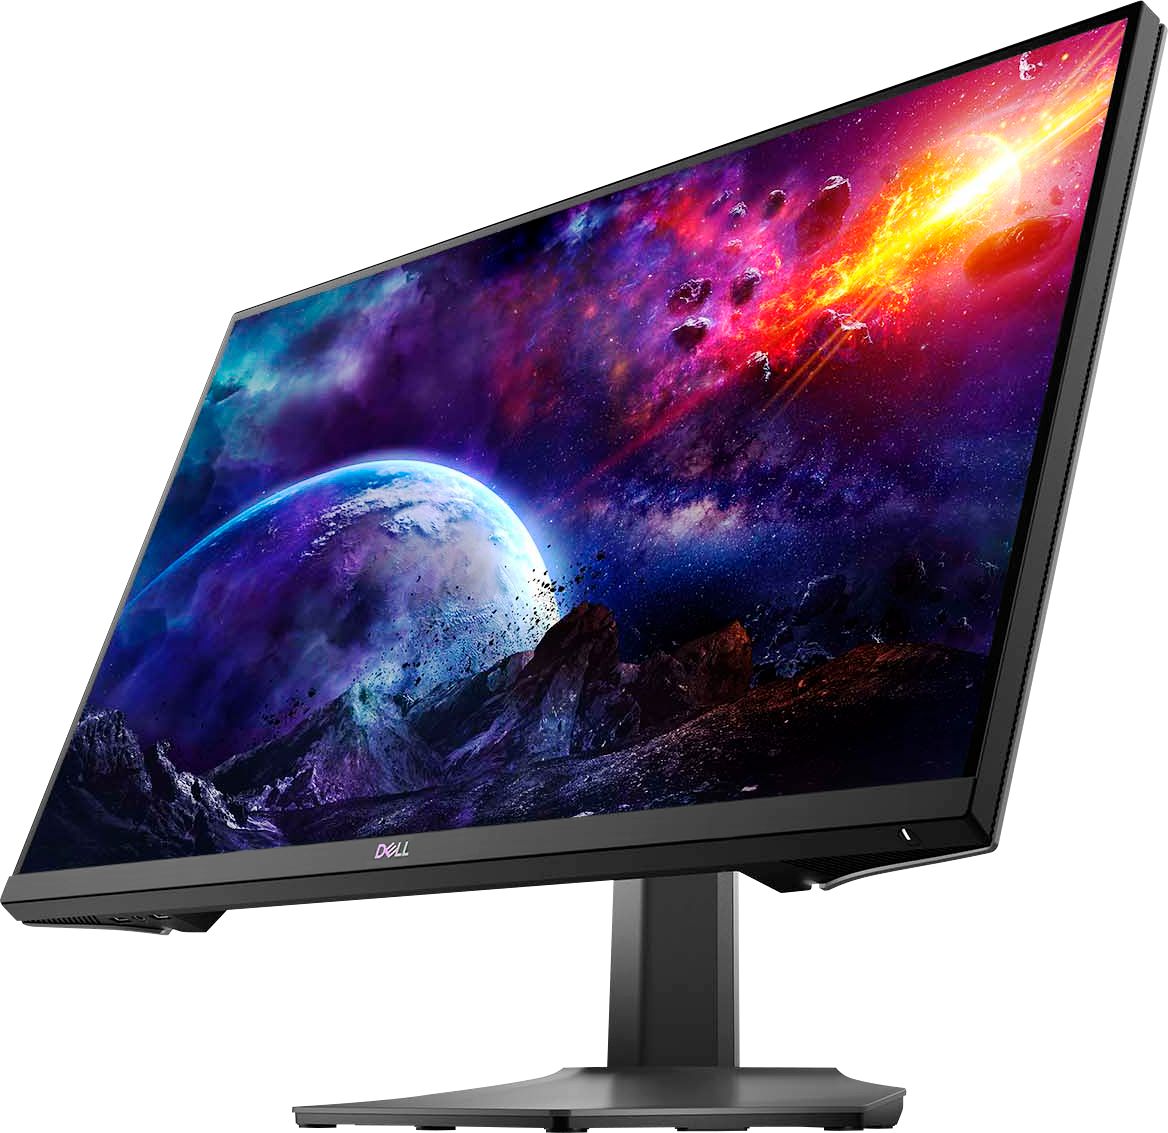 27-inch Dell S2721DGF 2K IPS 165Hz G-Sync gaming monitor on sale for $300  USD  News